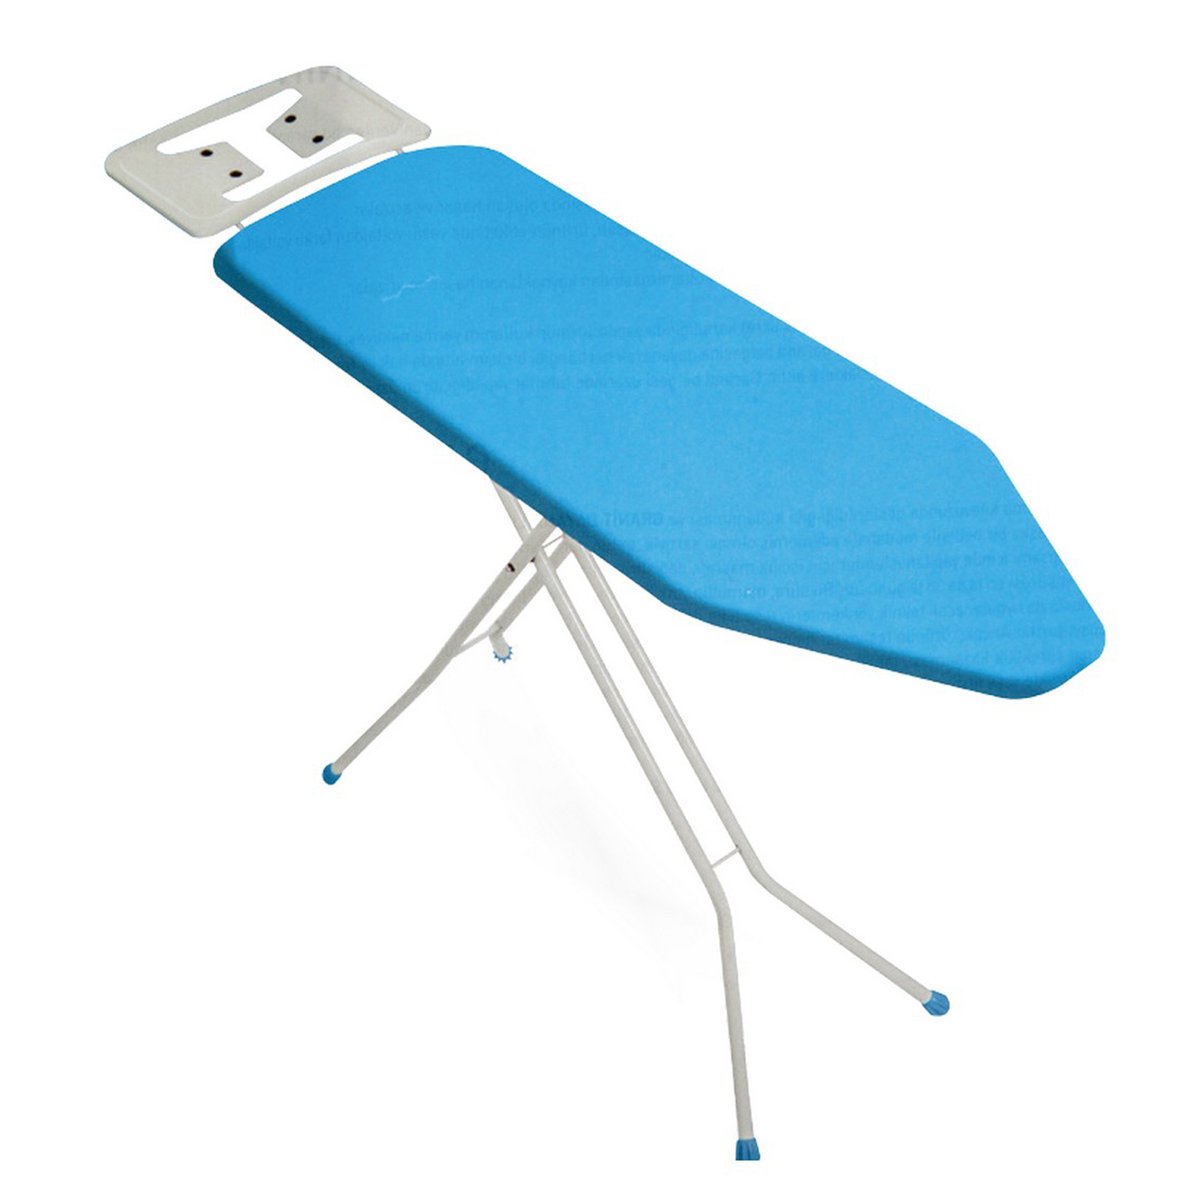 Granit Ironing Board 2978 Assorted